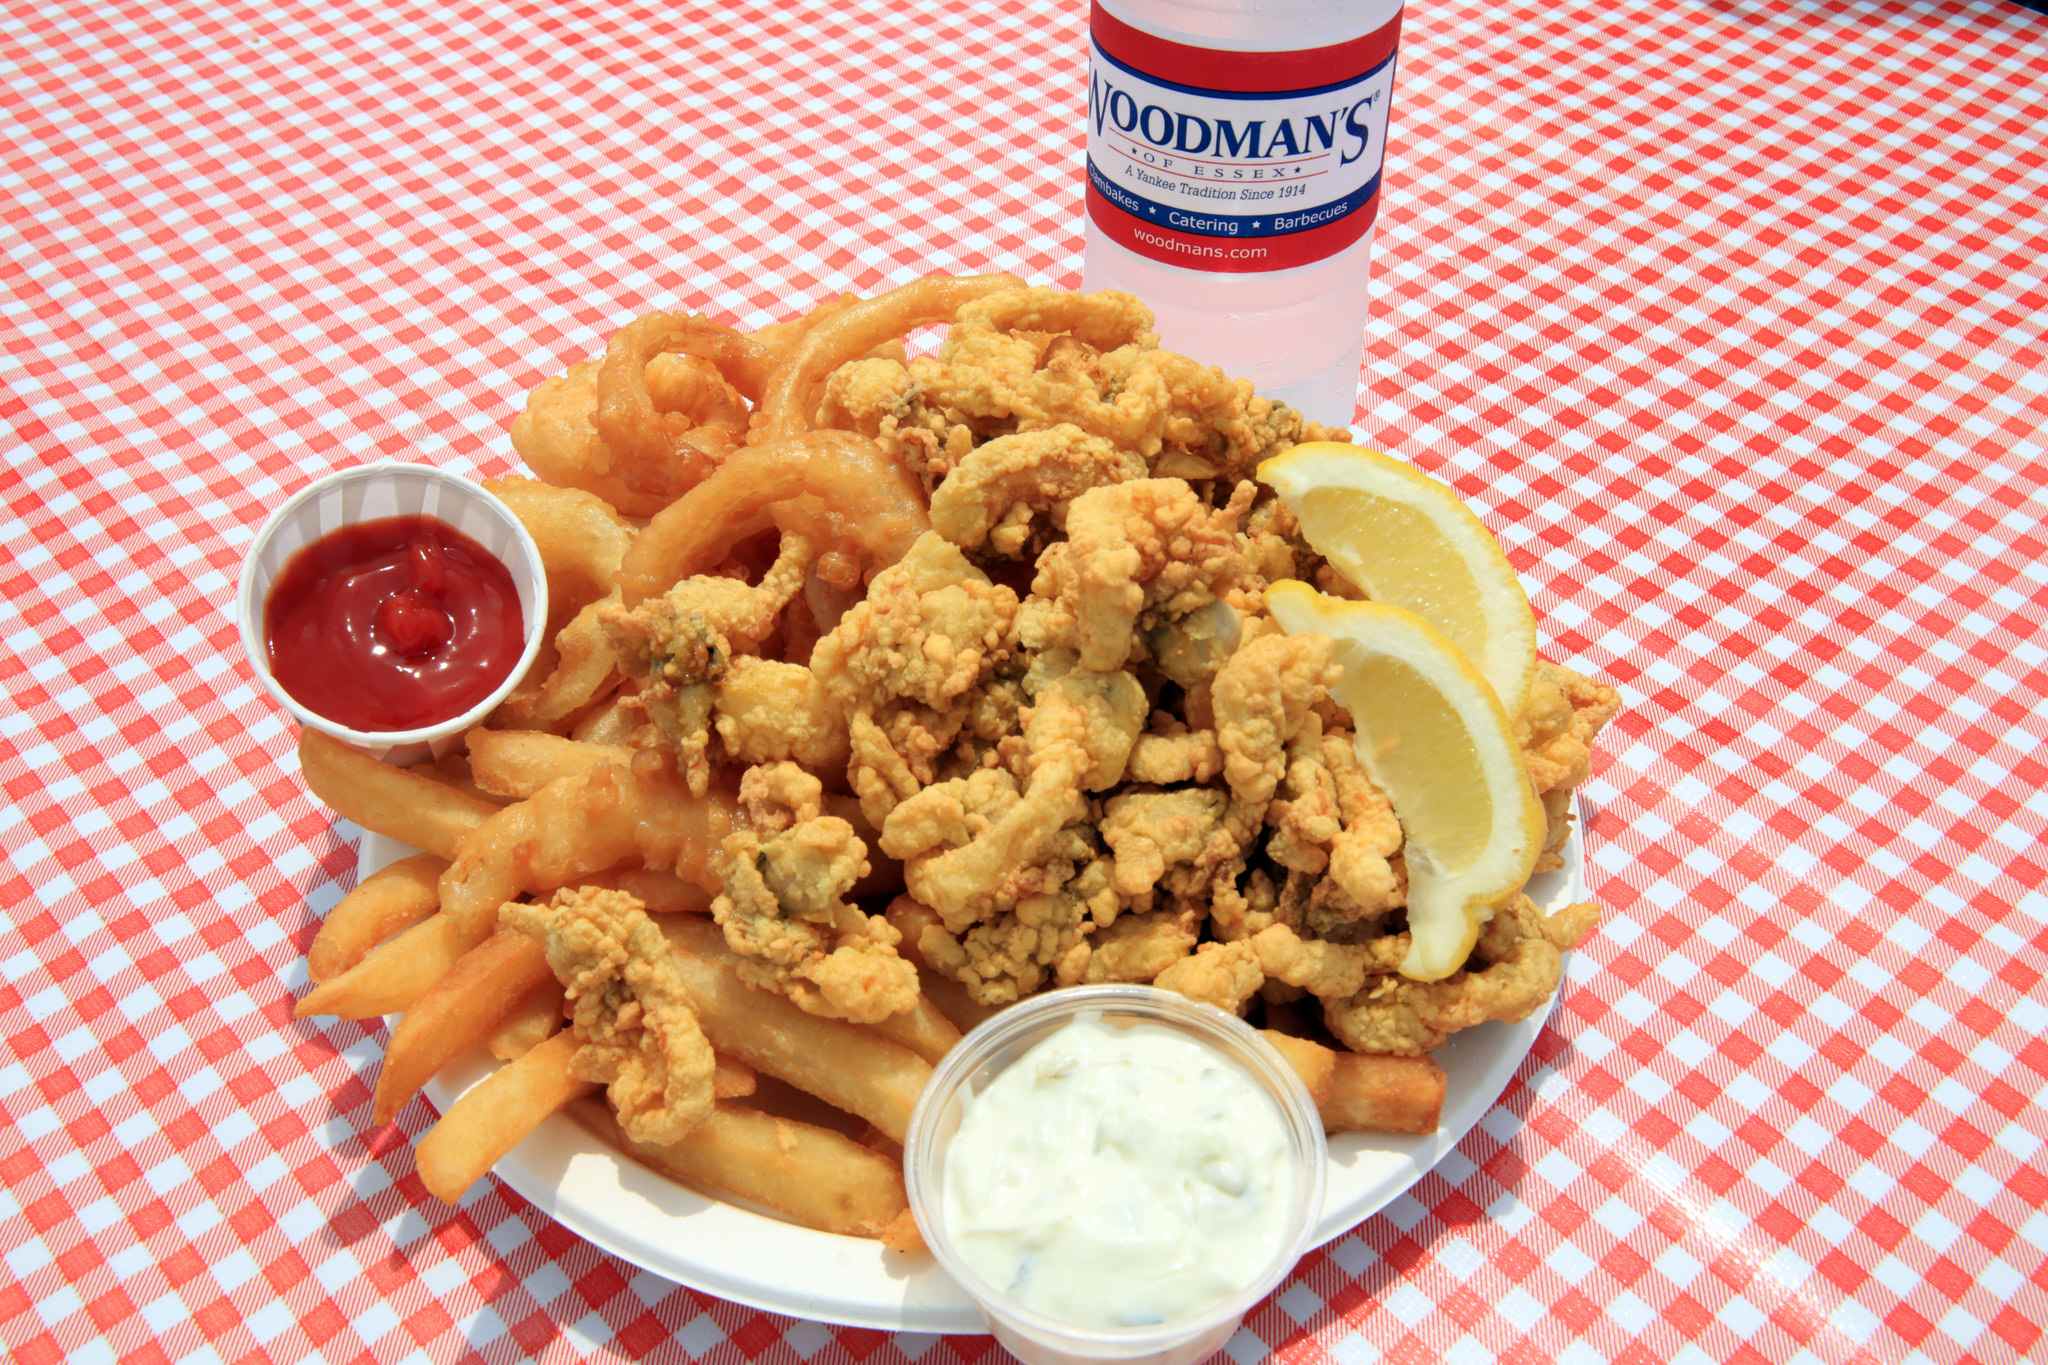 Fried Clams At Woodman's Of Essex